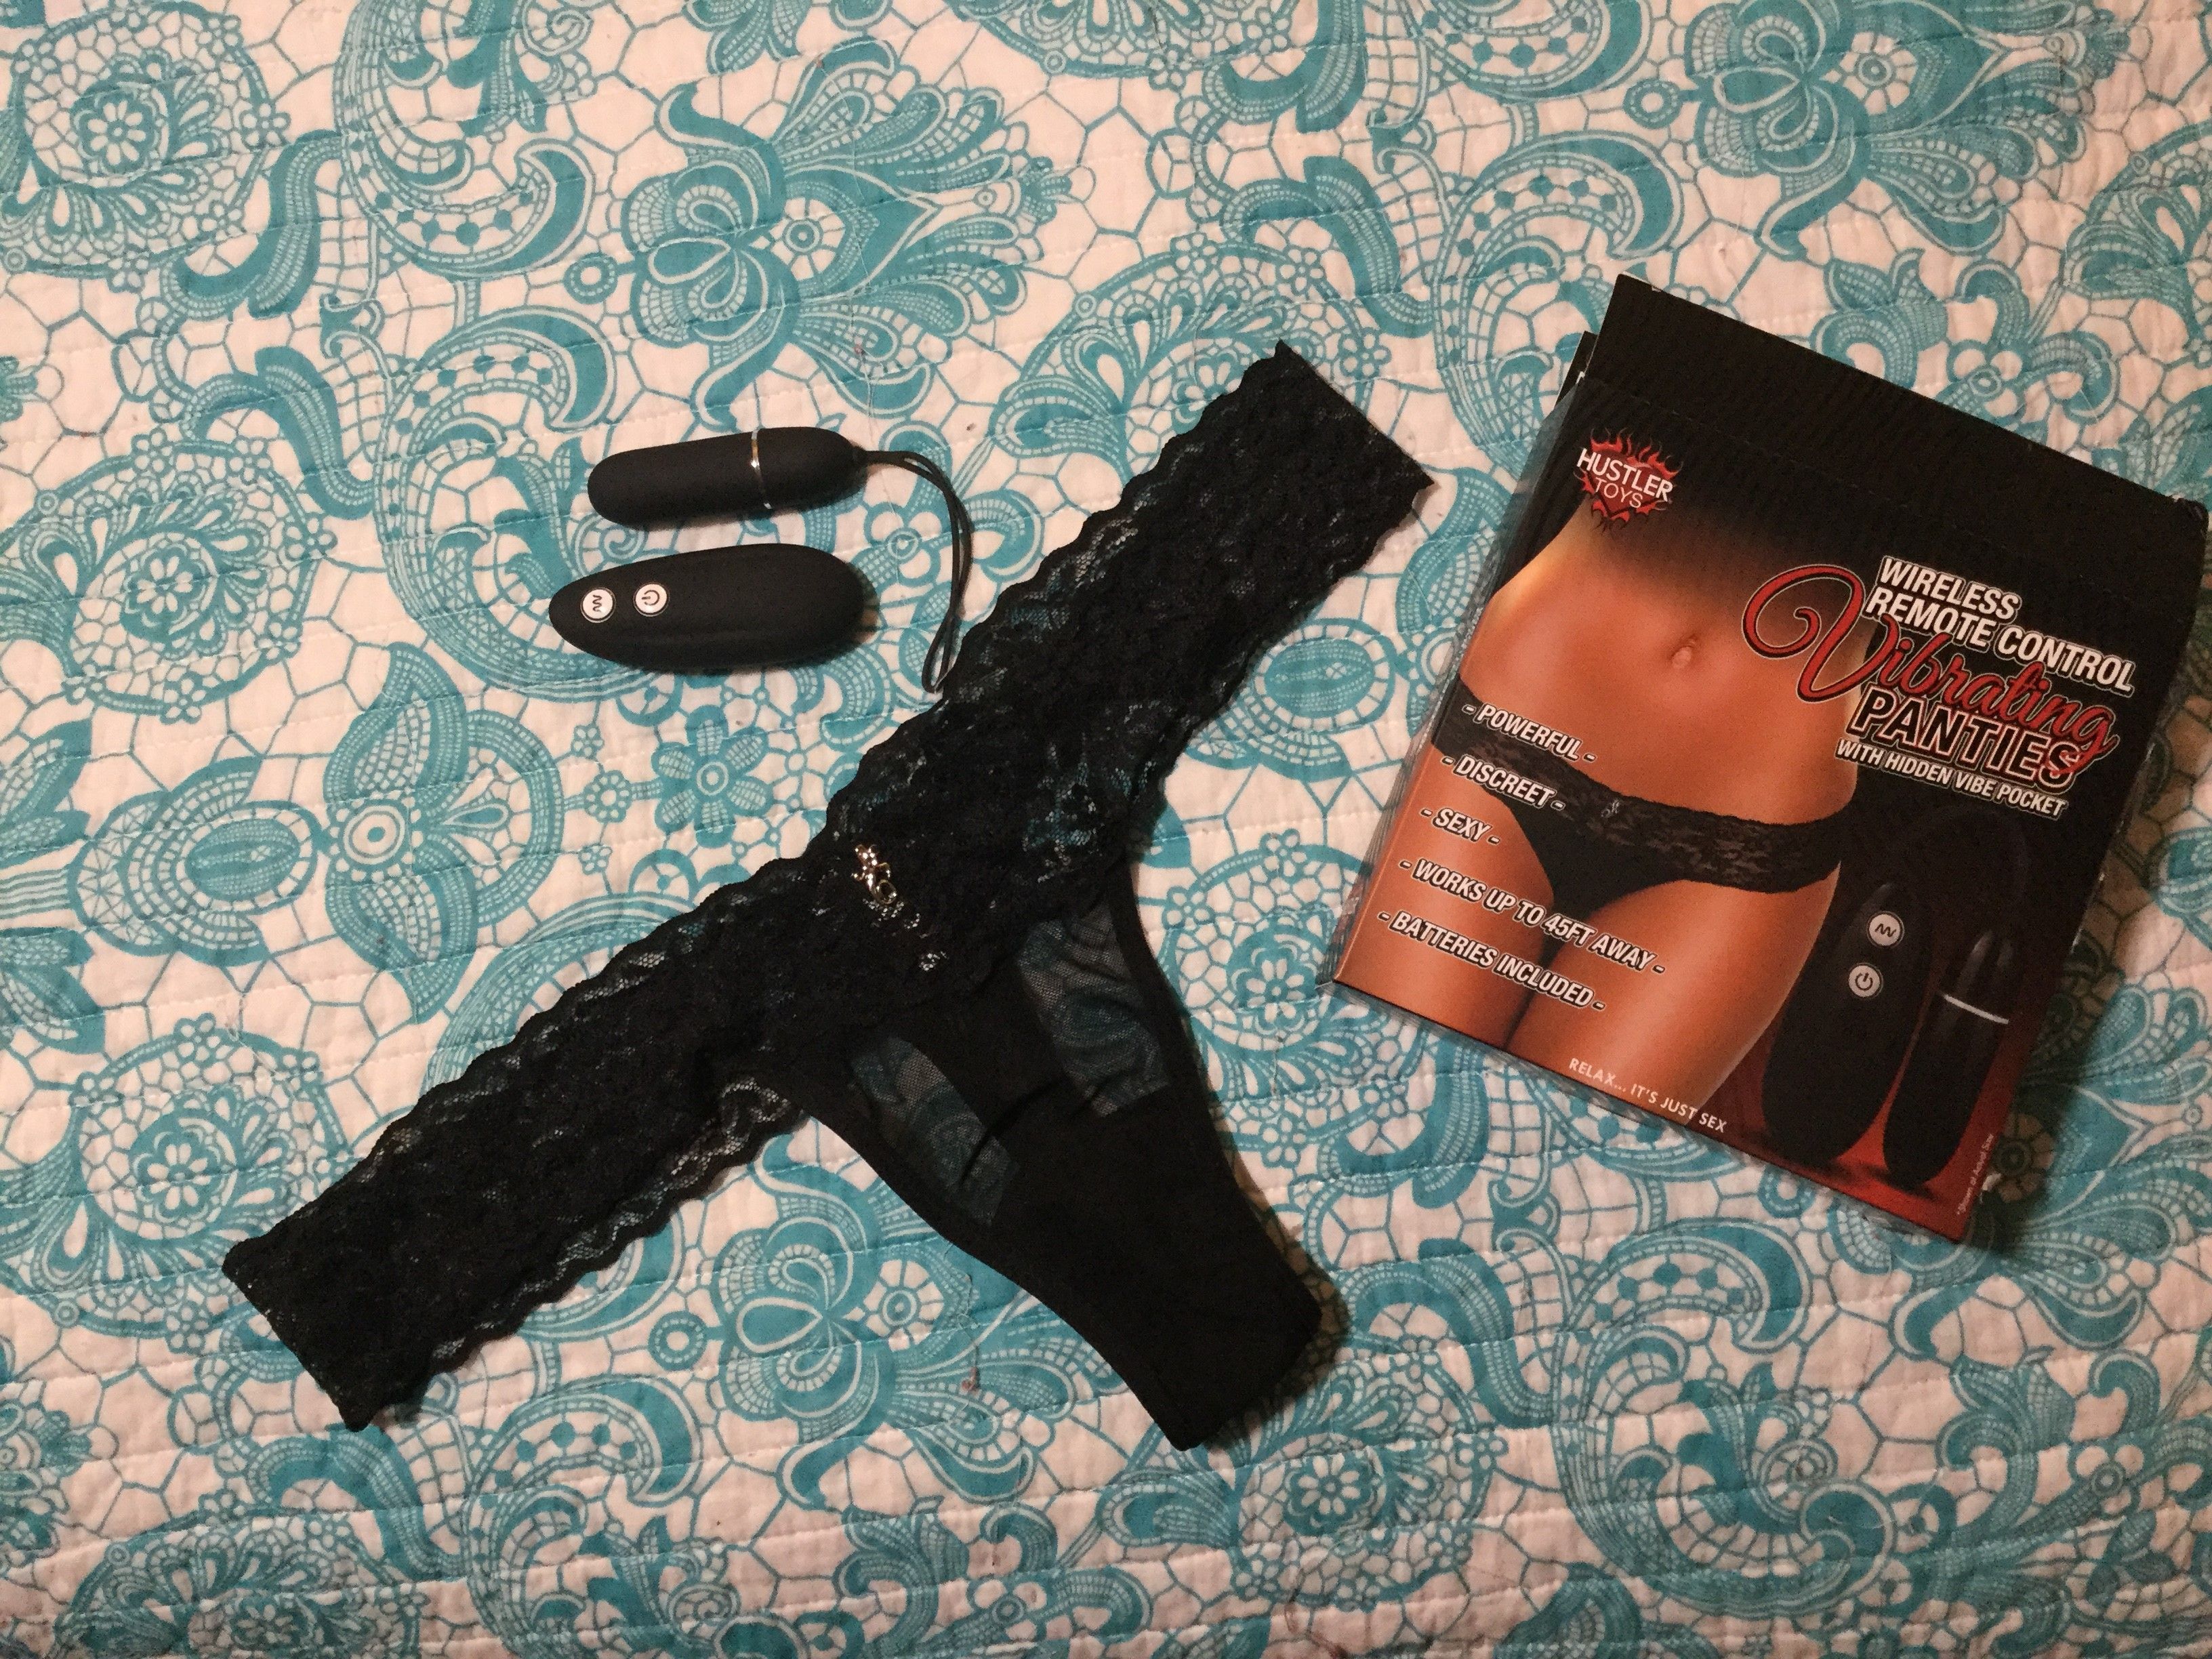 I Let My Fiancé Control A Pair of Vibrating Underwear in Public — Heres What Happened